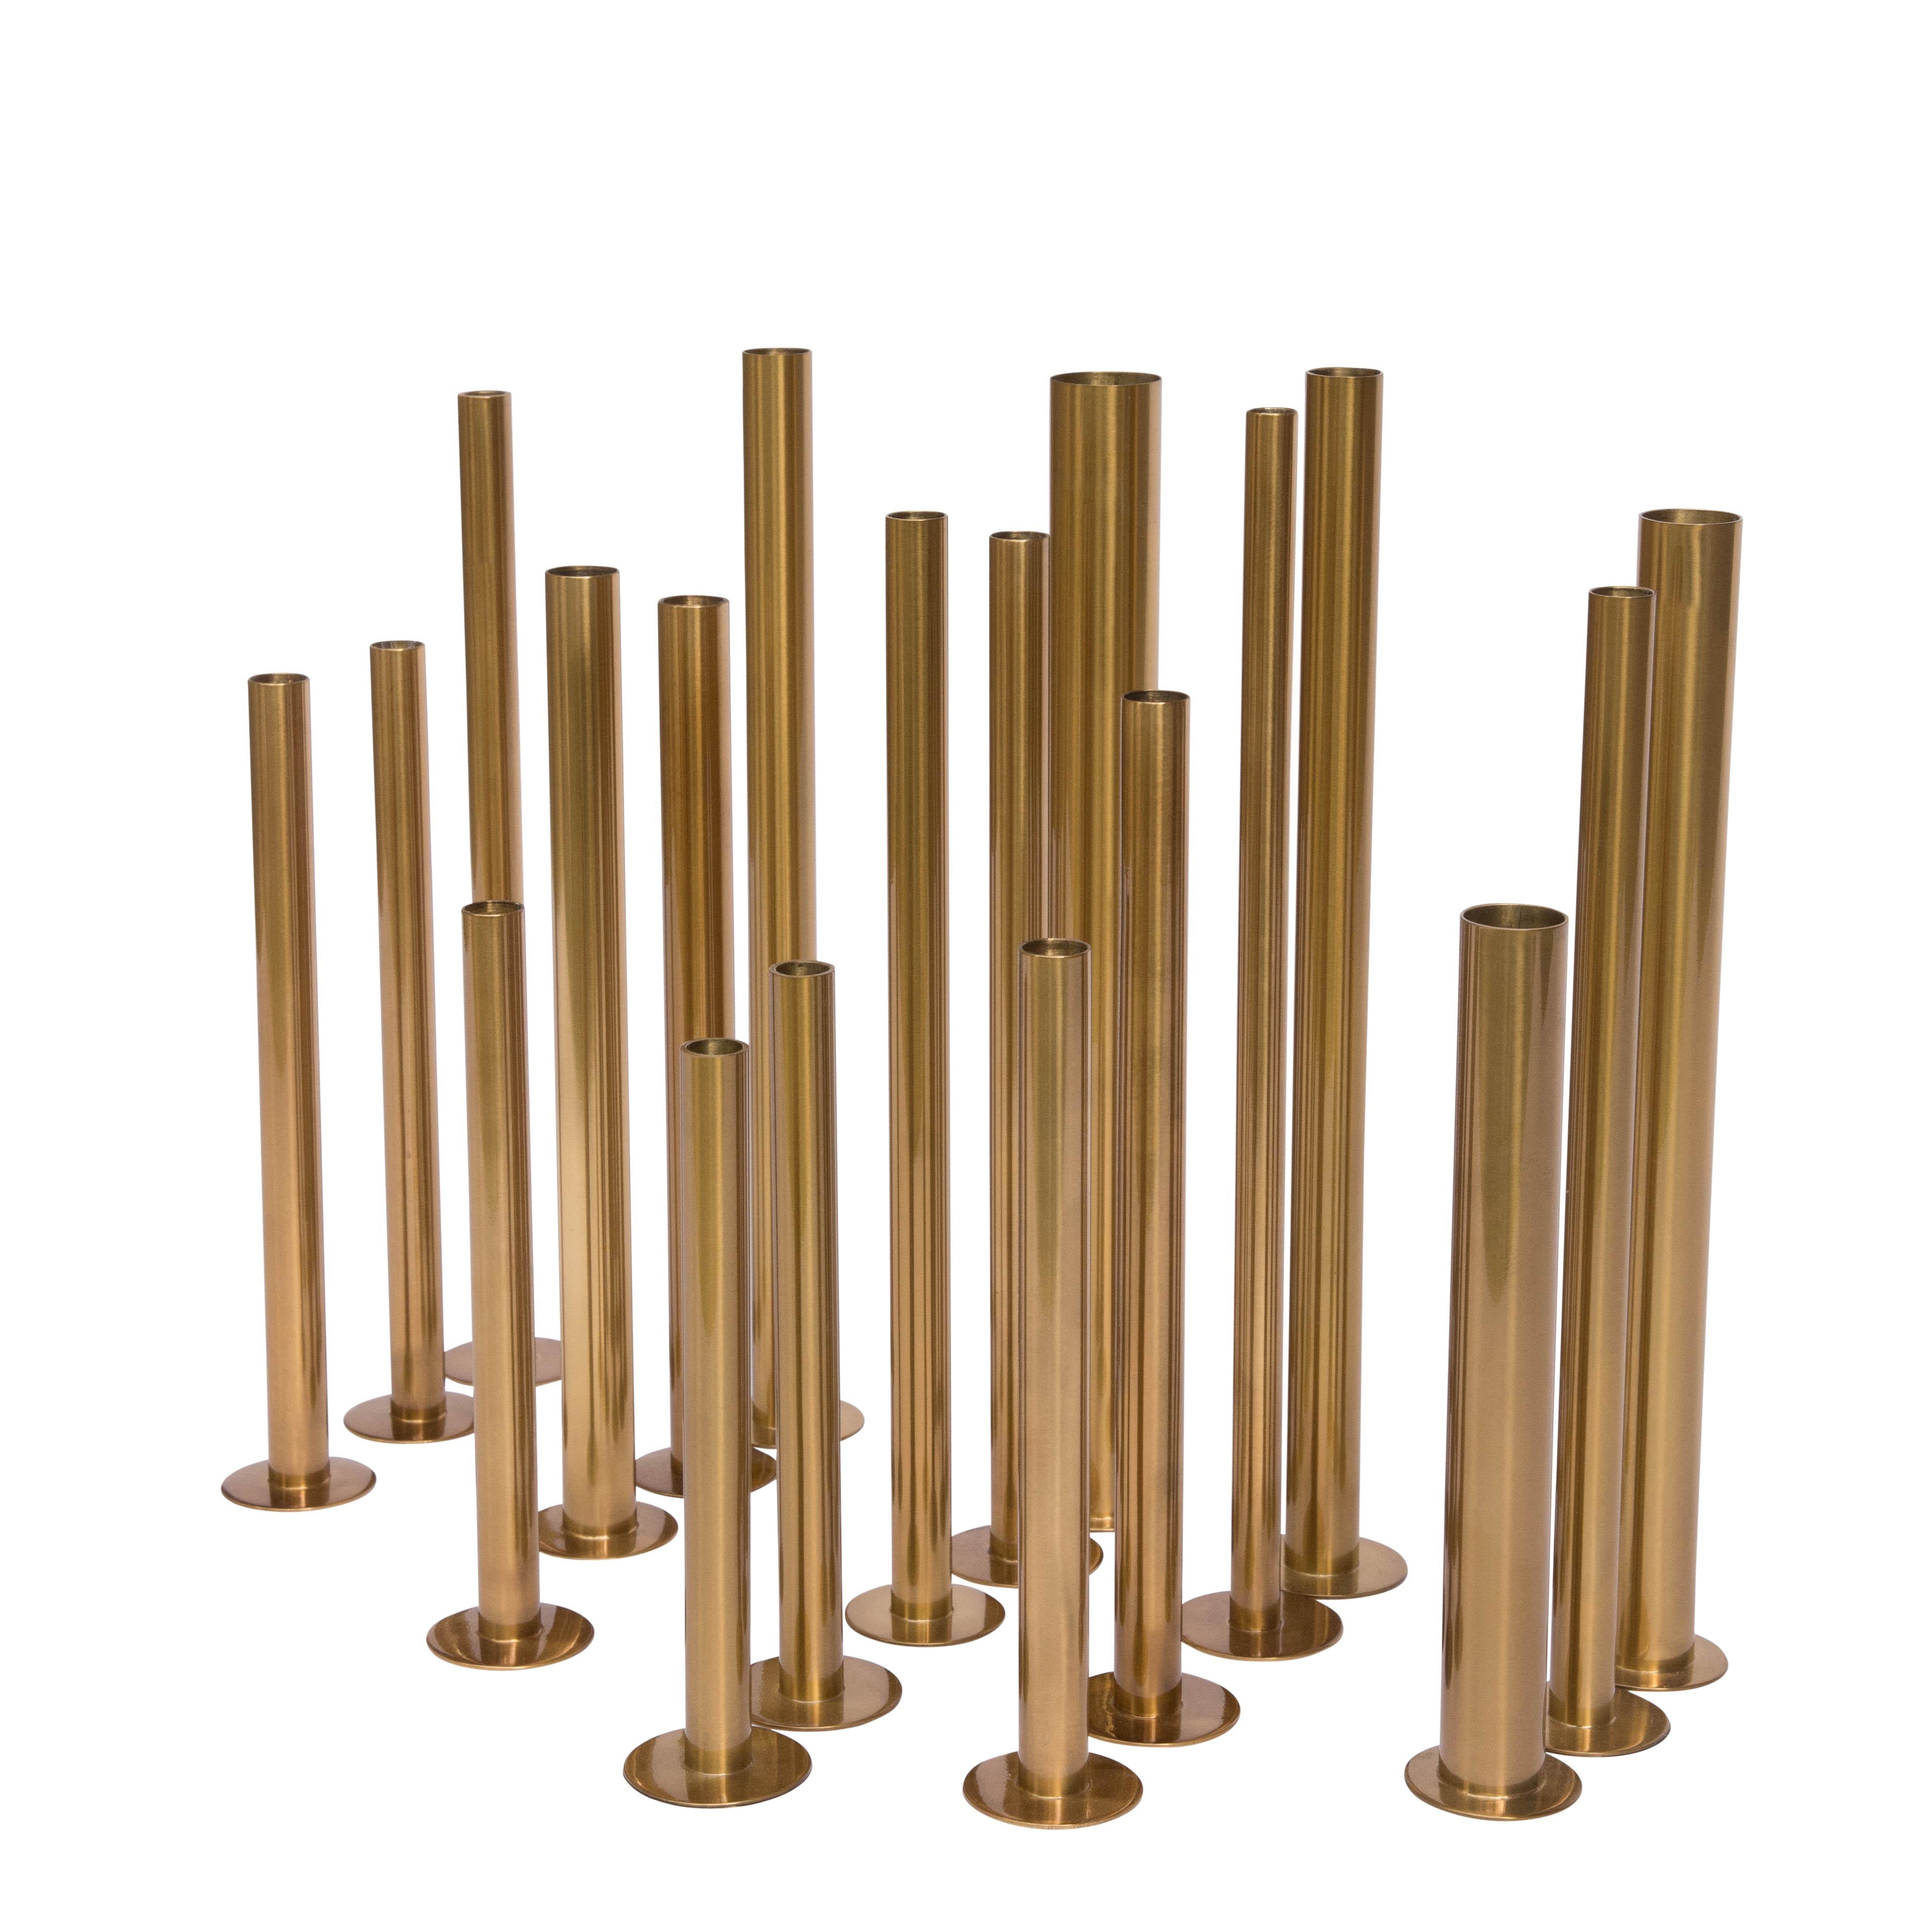 Set of flower holders, handmade brass cylinder-shaped made of different sizes in diameter and heights. Handmade brass cylinder-shaped made of different sizes and heights.

A set of 20 brass sculptures which could used as a flower holder designed